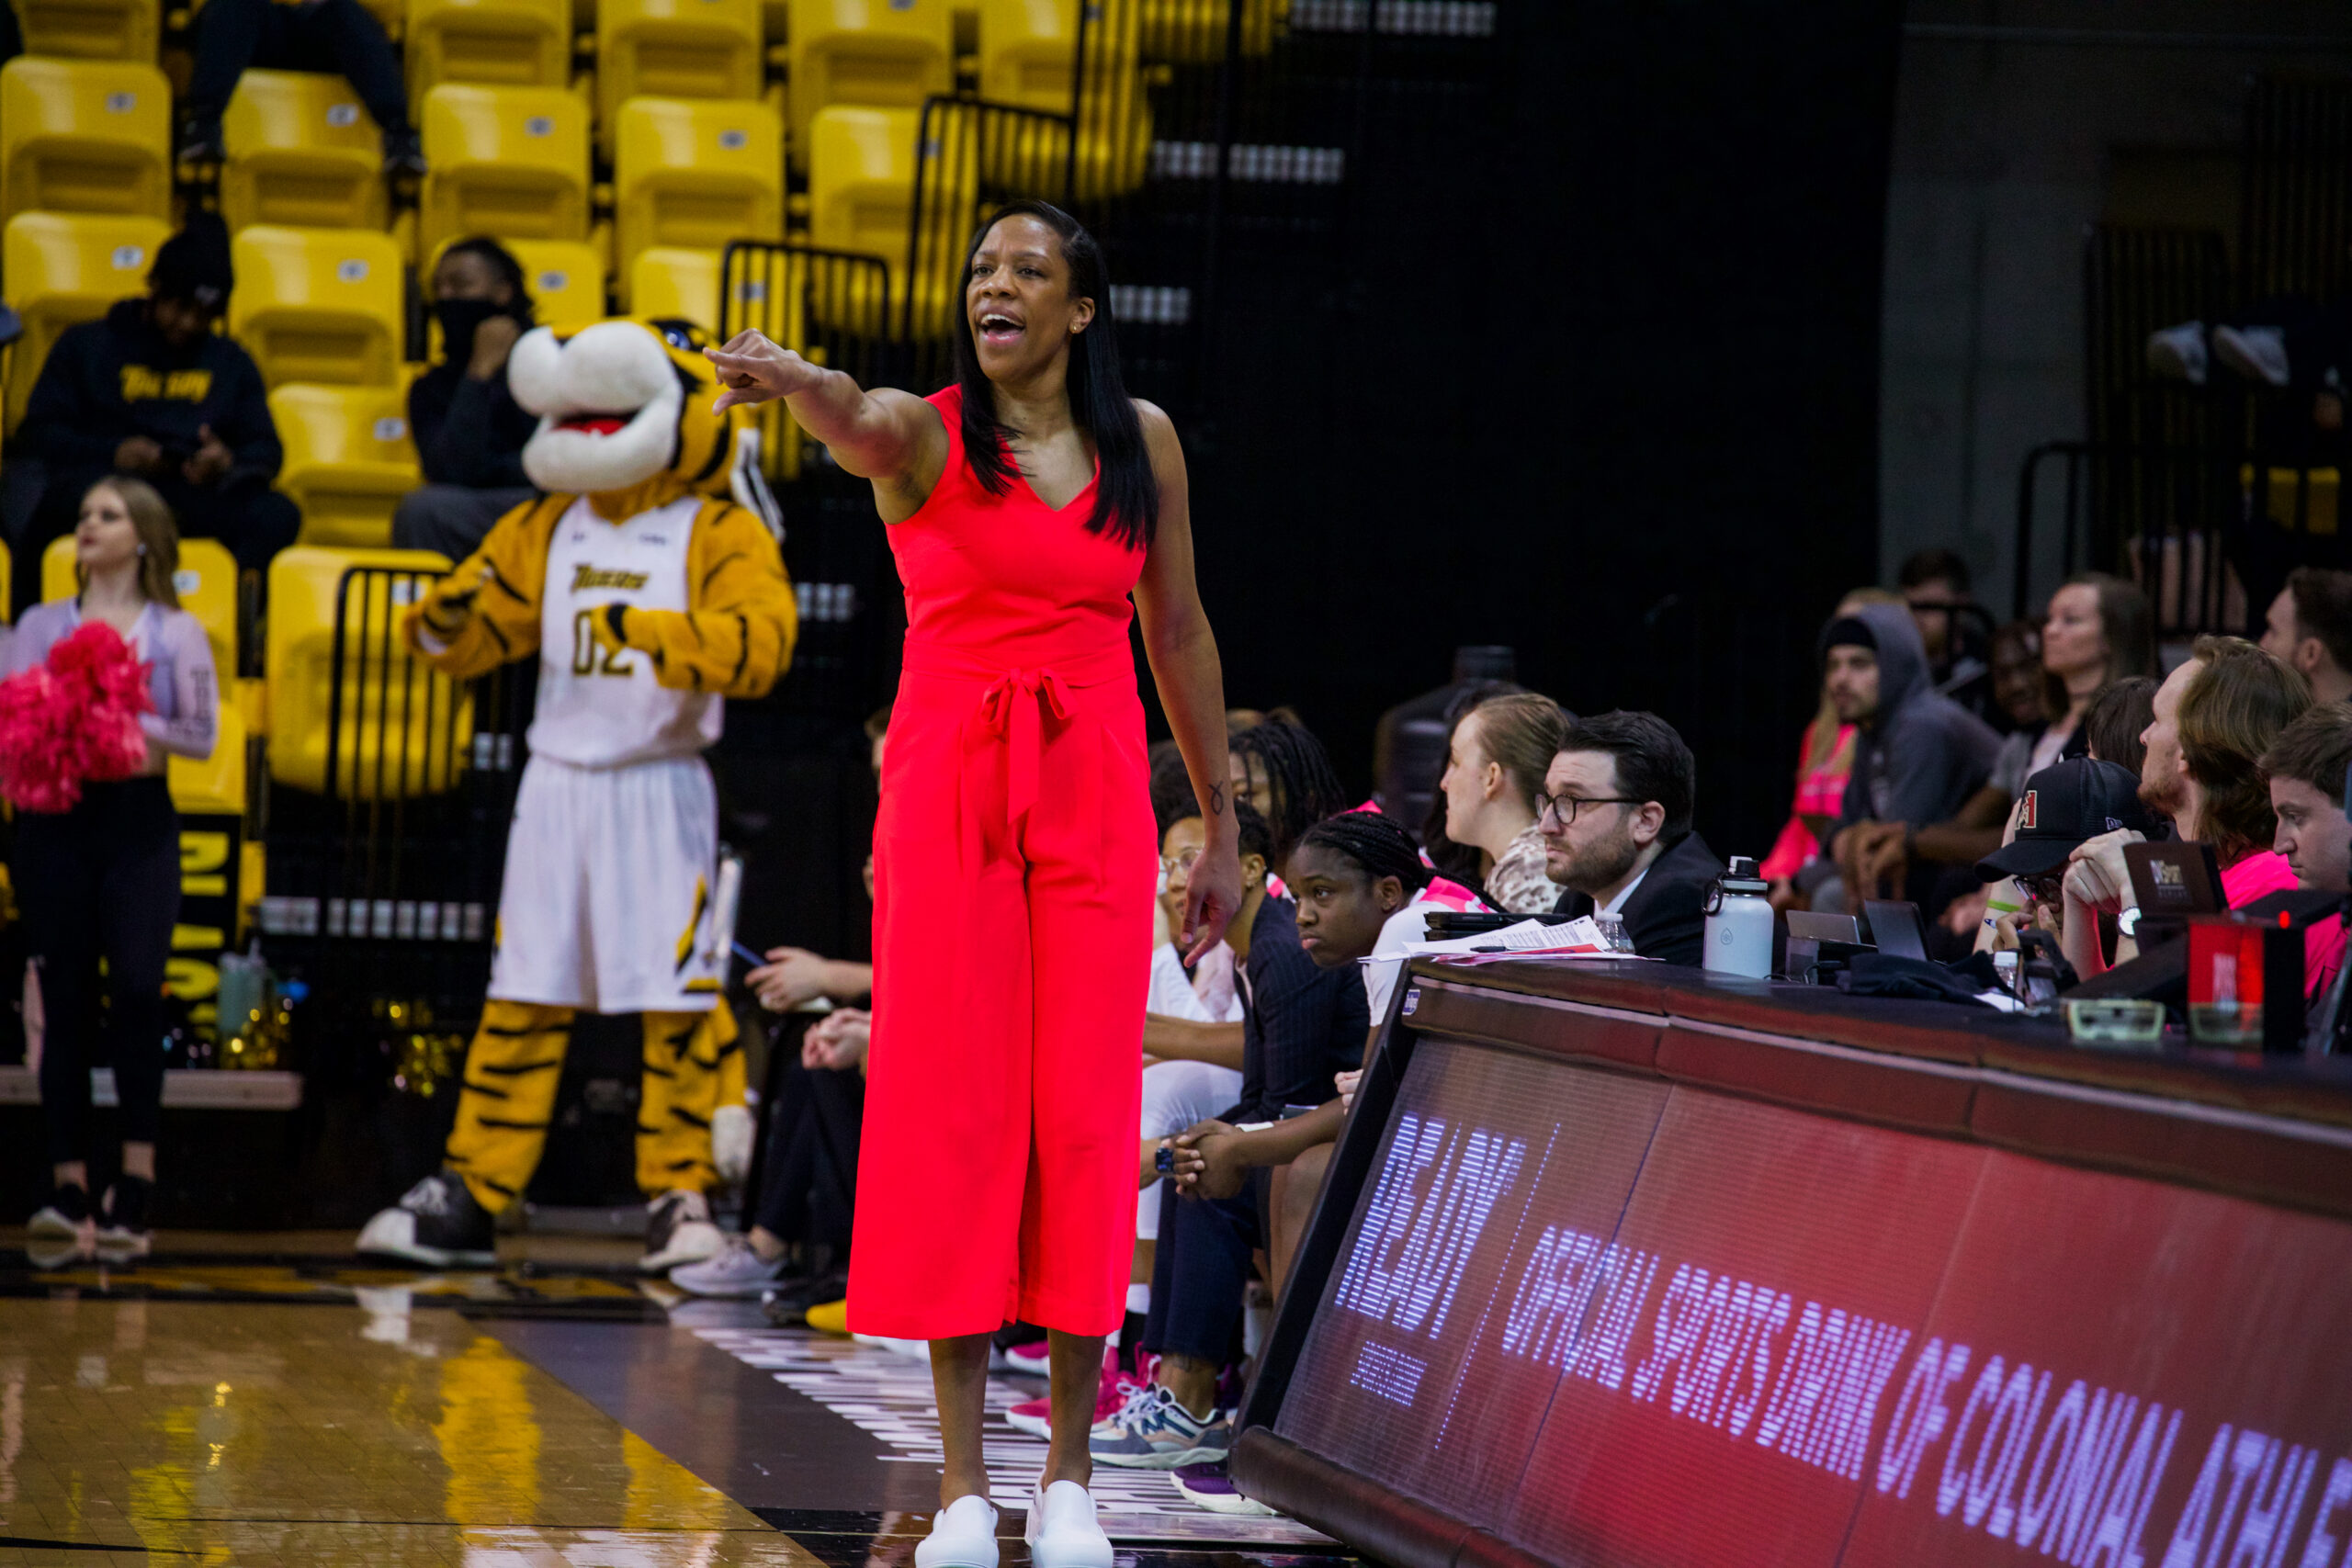 A picture of Towson Women's Basketball Head Coach Laura Harper as she stands in the bench area during a game on March 10.